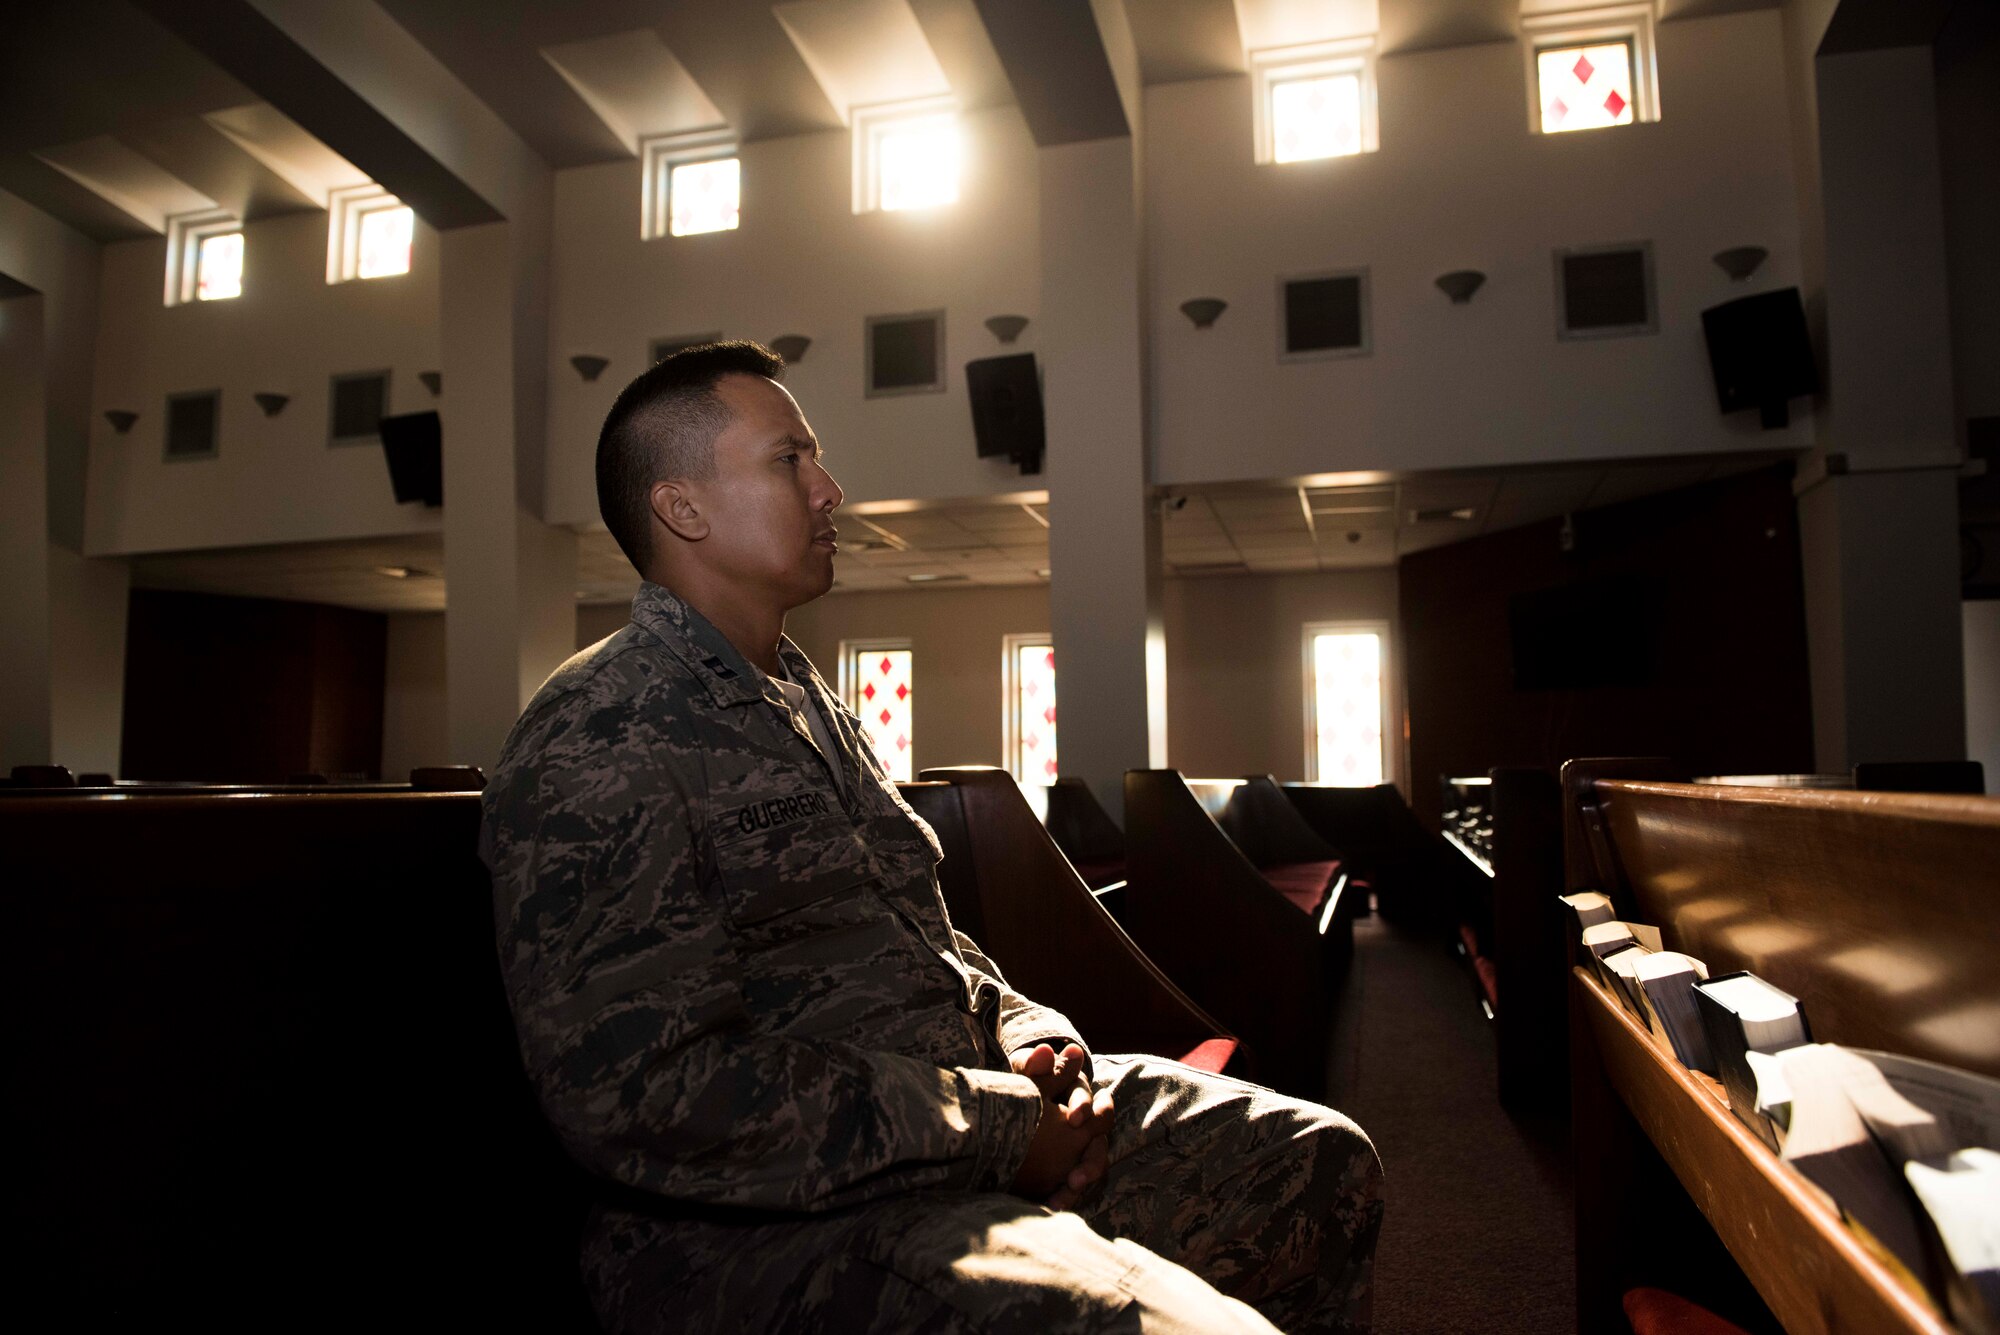 U.S. Air Force Capt. Genesis Guerrero, a 39th Air Base Wing chaplain, meditates in the chapel at Incirlik Air Base, Turkey, Oct. 2, 2019. The chaplain survived a challenging childhood due to his father’s troubled lifestyle, but the pair reconciled after the younger Guerrero found his faith at the age of 18. (U.S. Air Force photo by Staff. Sgt. Joshua Magbanua)